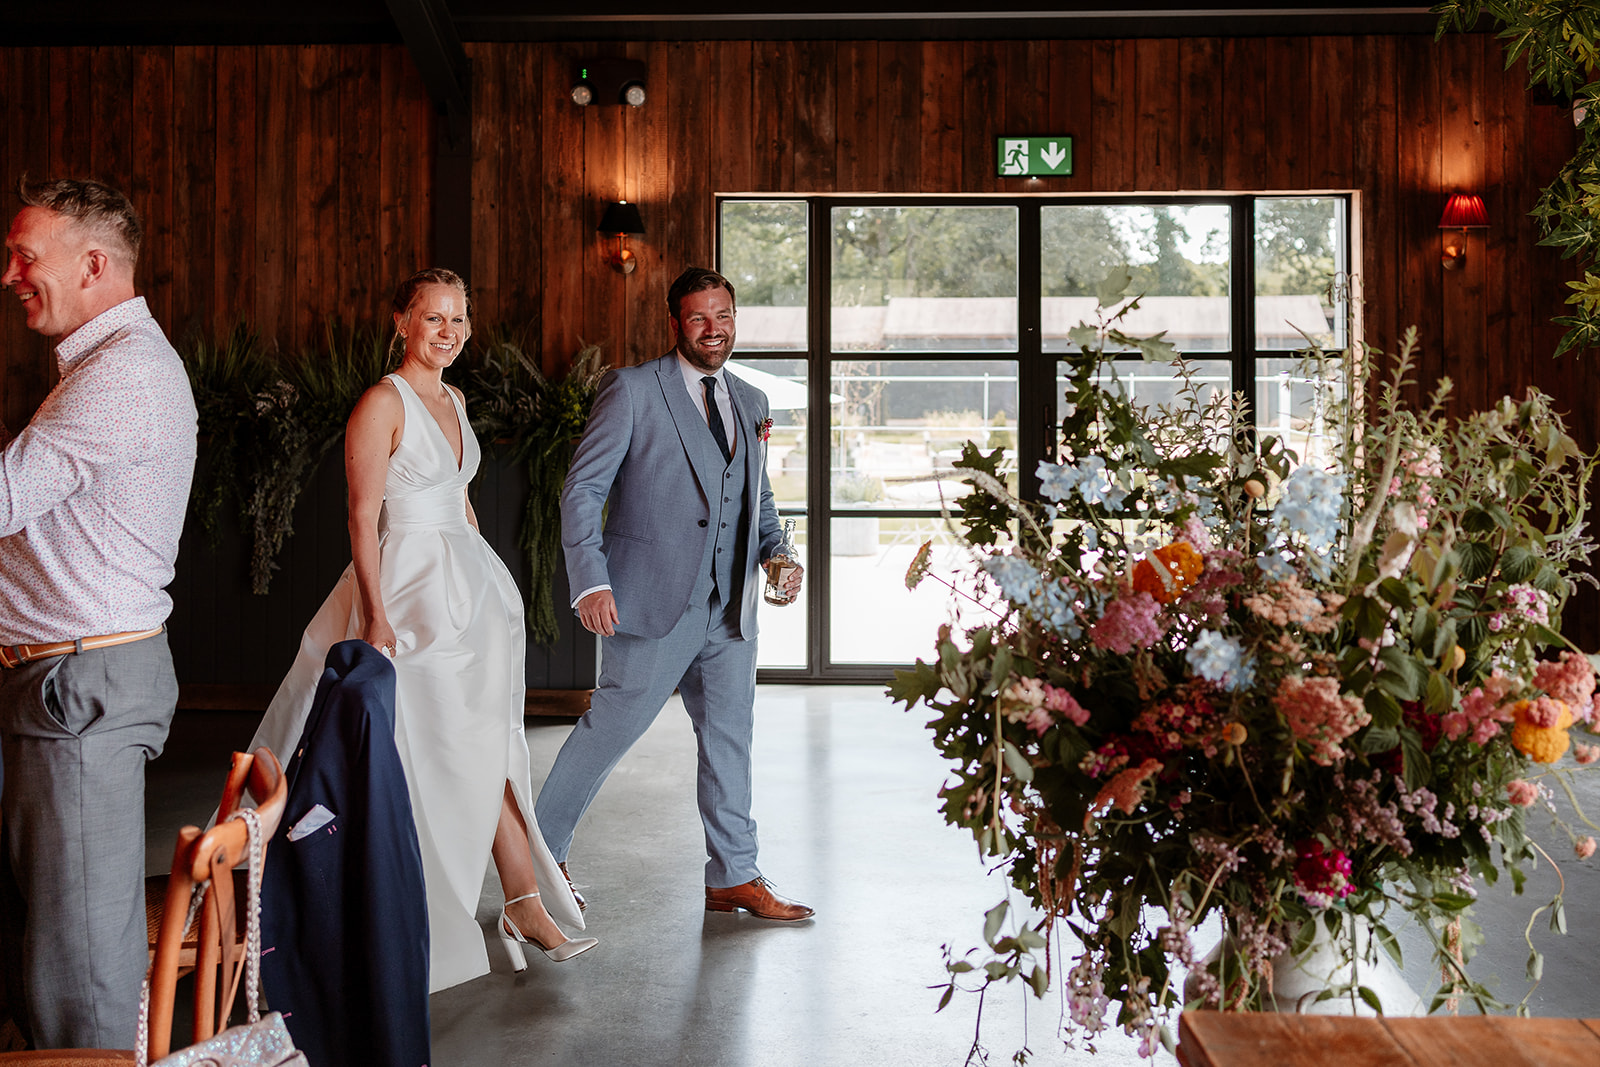 Bride and groom walk into their wedding breakfast together at a summer wedding at Silchester Farm